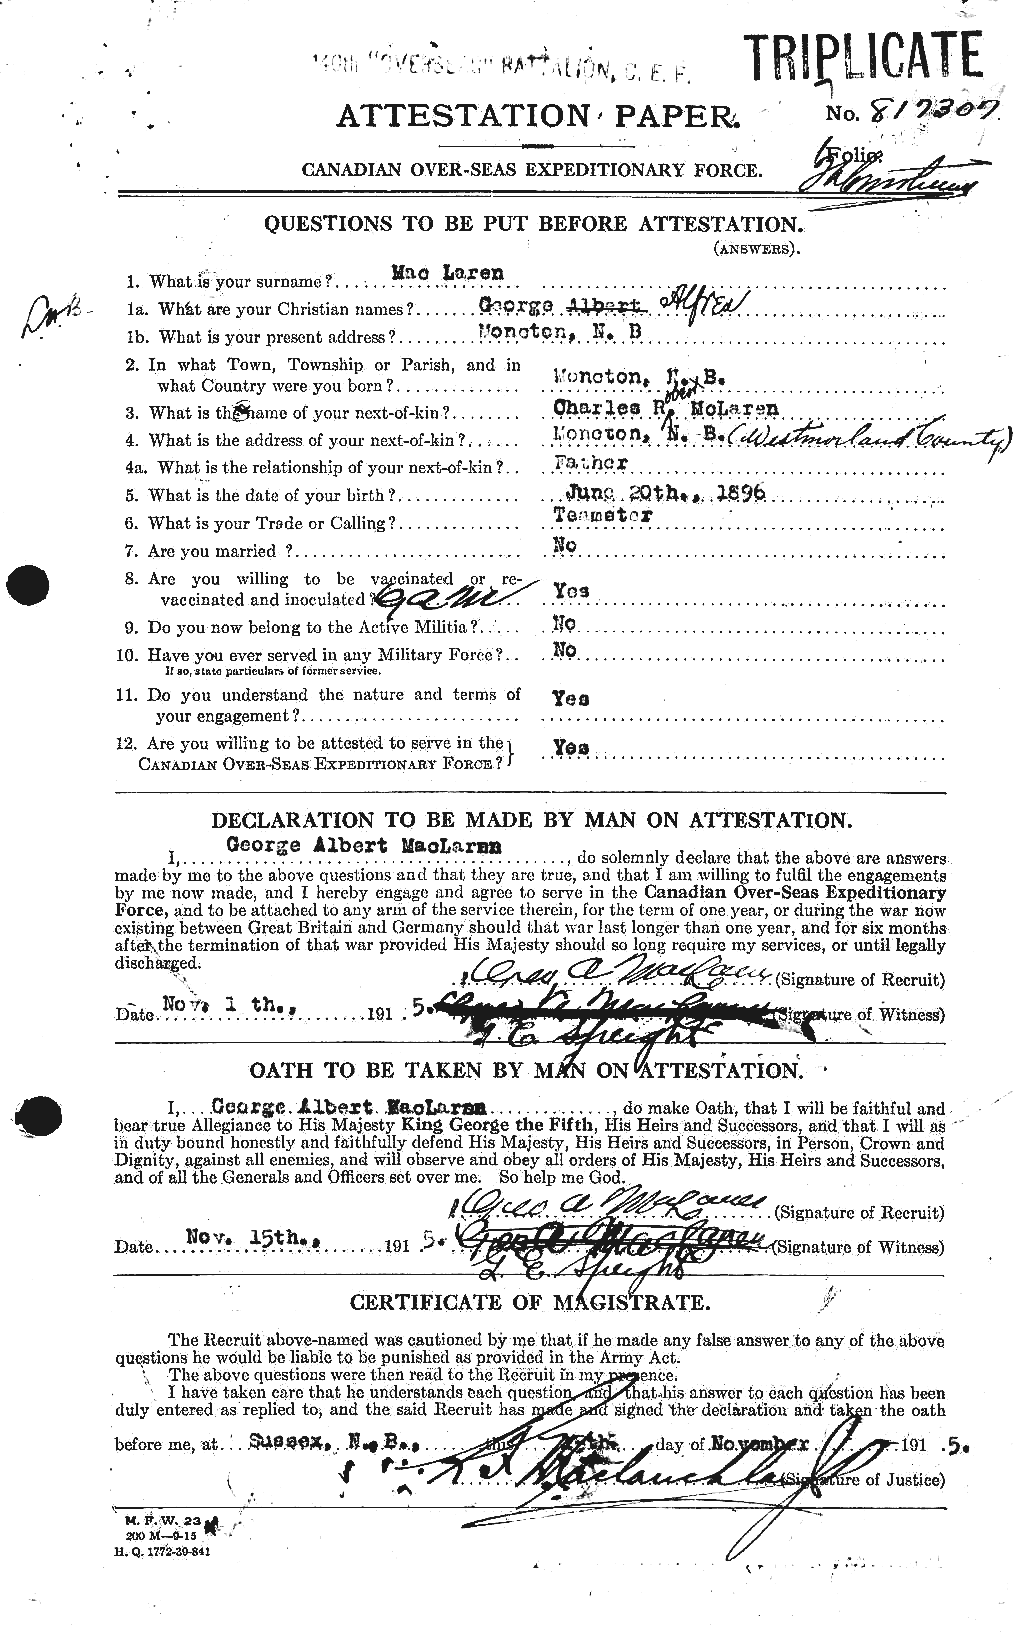 Personnel Records of the First World War - CEF 534122a